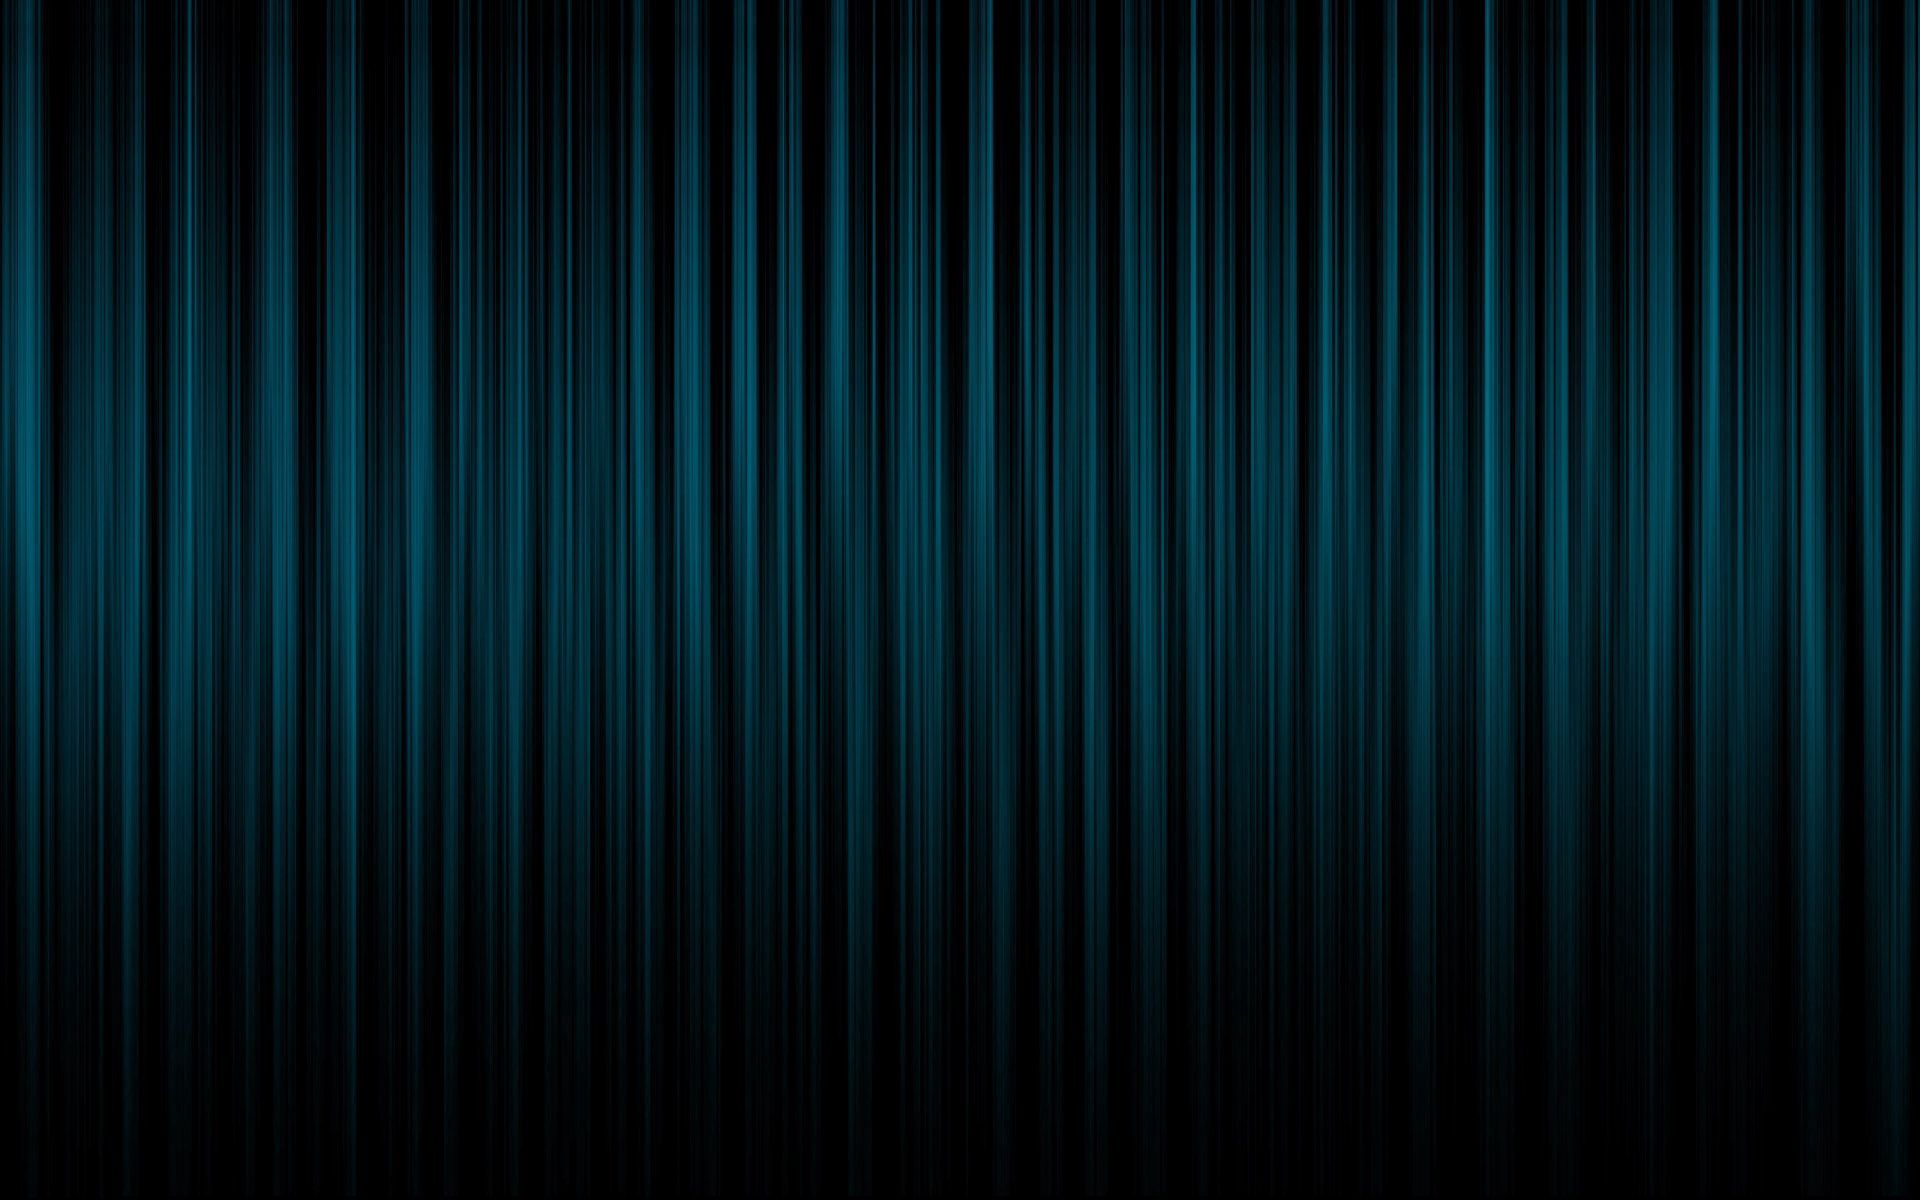 134046 download wallpaper vertical, background, blue, texture, textures, stripes, streaks screensavers and pictures for free